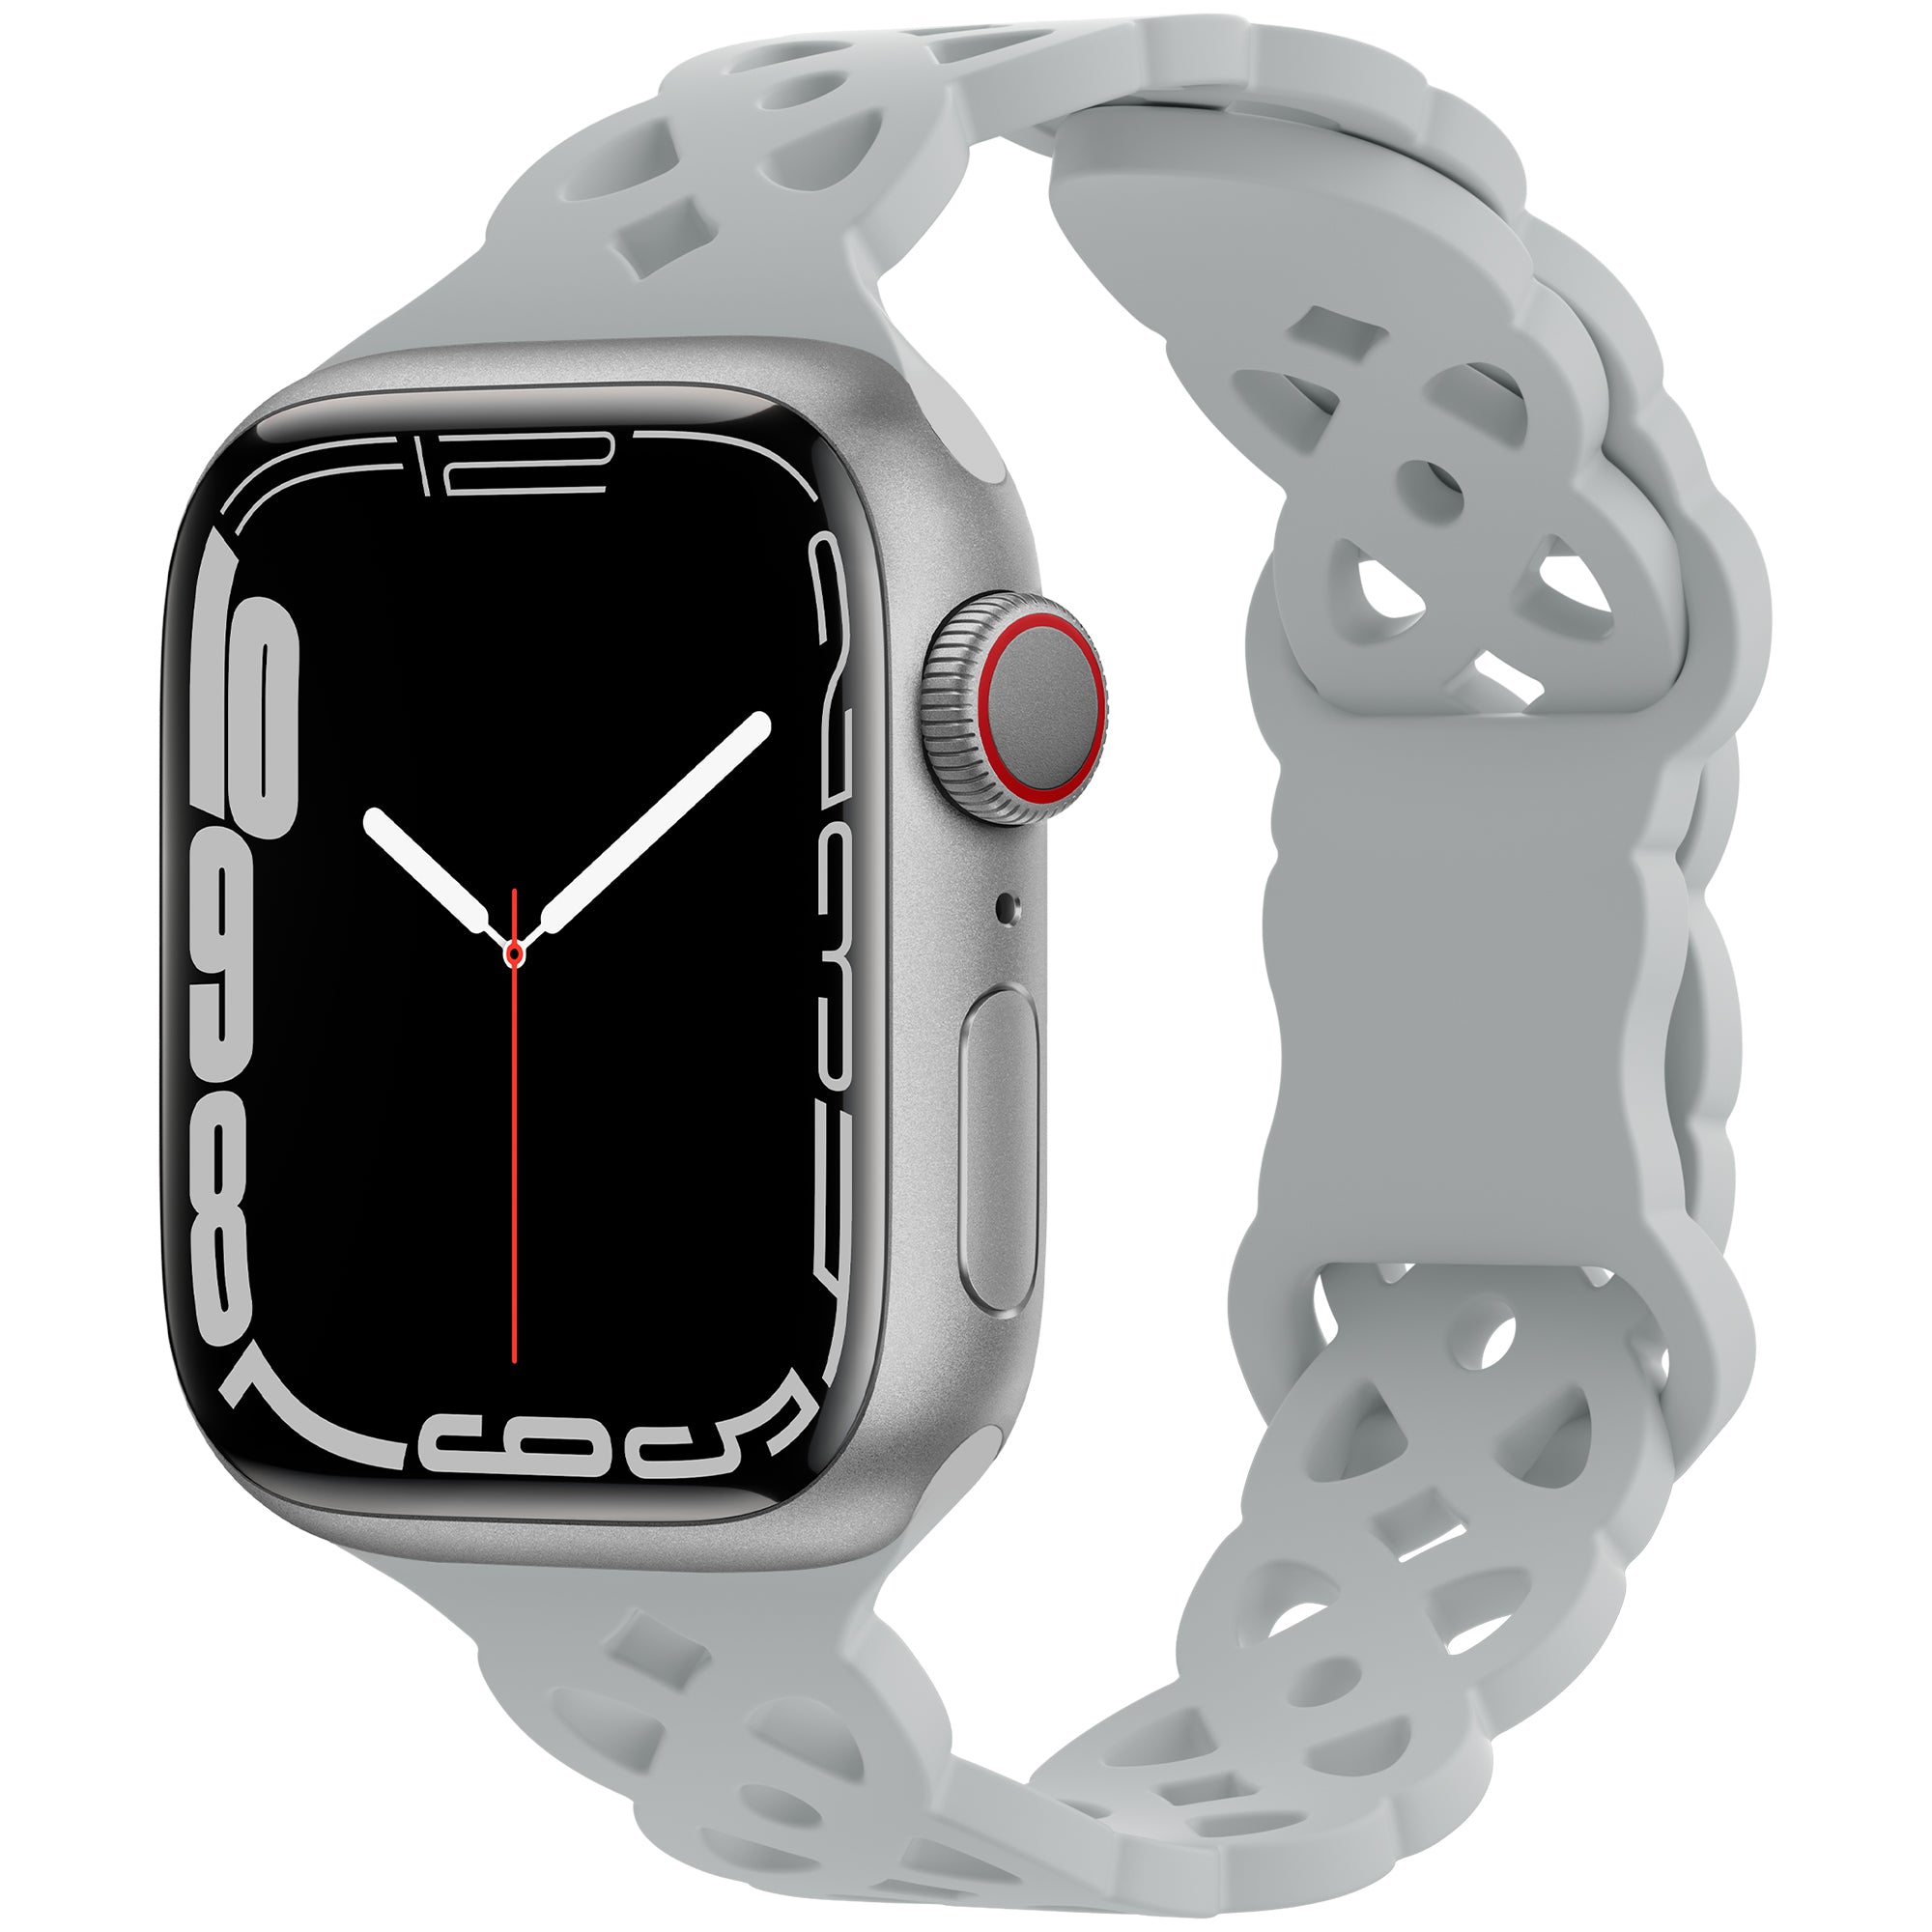 Braided Bliss Silicone Band For Apple Watch Multiple Colors Available